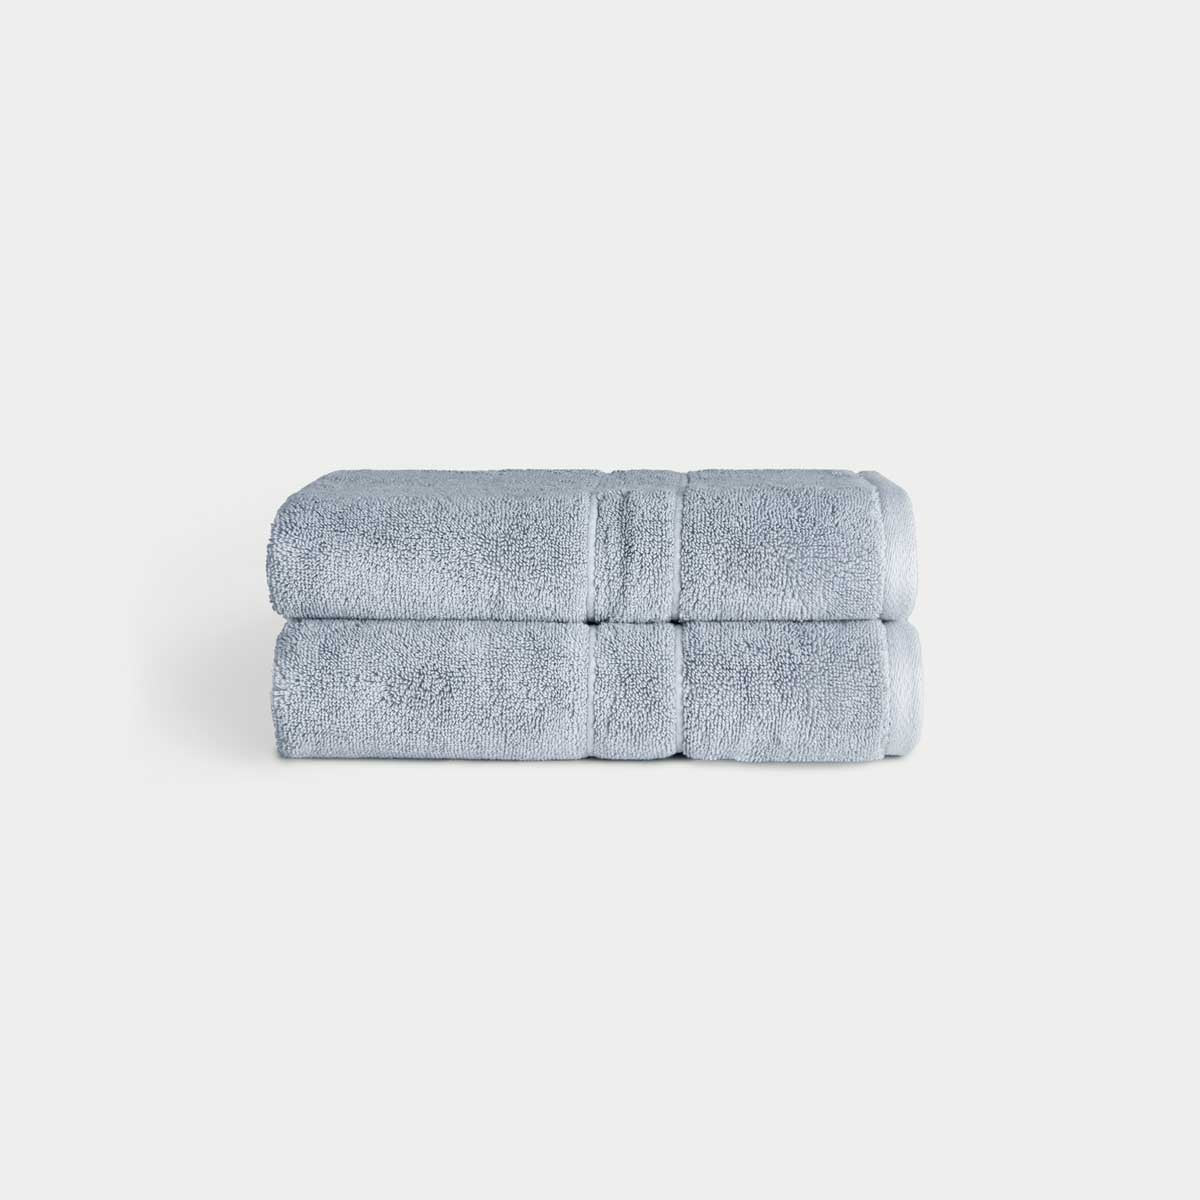 Premium Plush Hand Towels in the color Harbor Mist. Photo of Complete Premium Plush Hand Towel taken with white background 